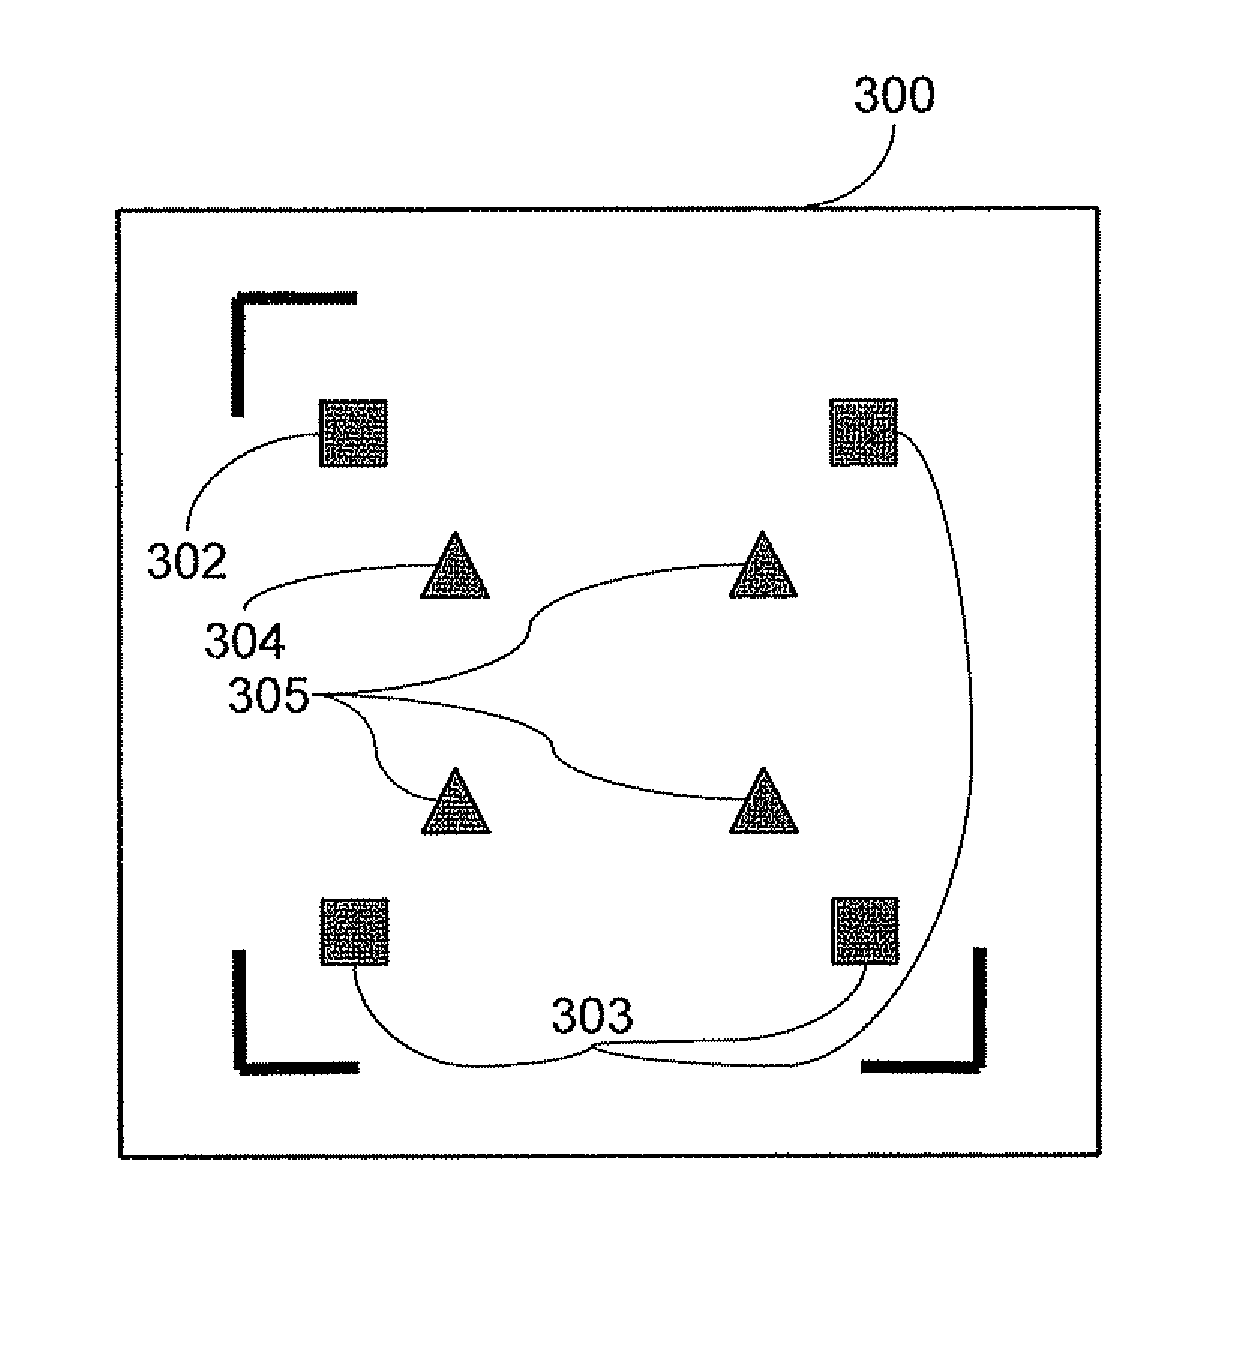 Method for producing printed patches for optical and high-contrast guidance